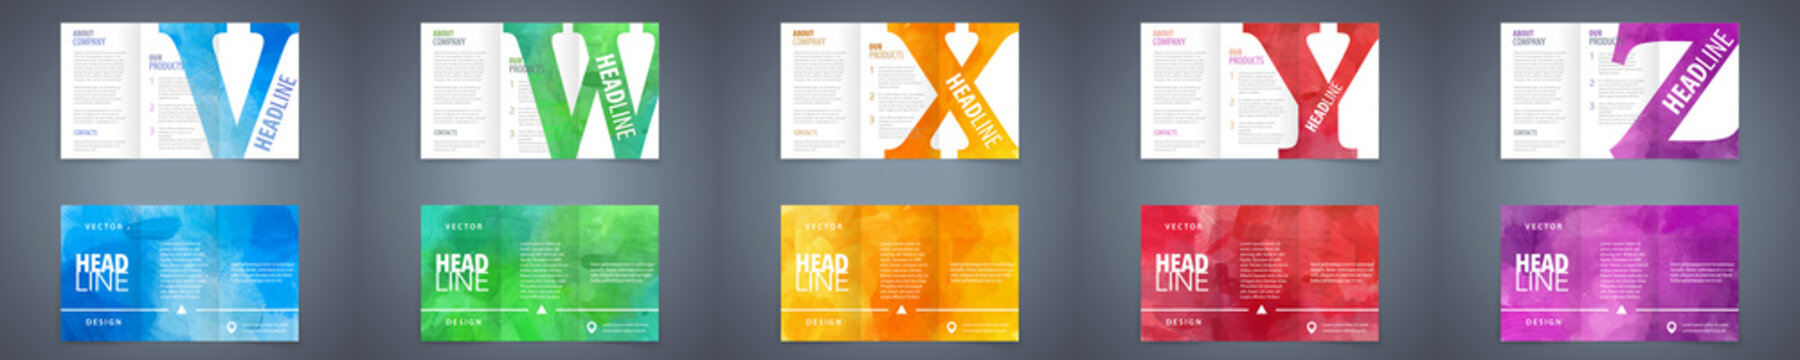 Vector trifold brochure design template set with colorful watercolor background and letter design element. Best corporate style layout